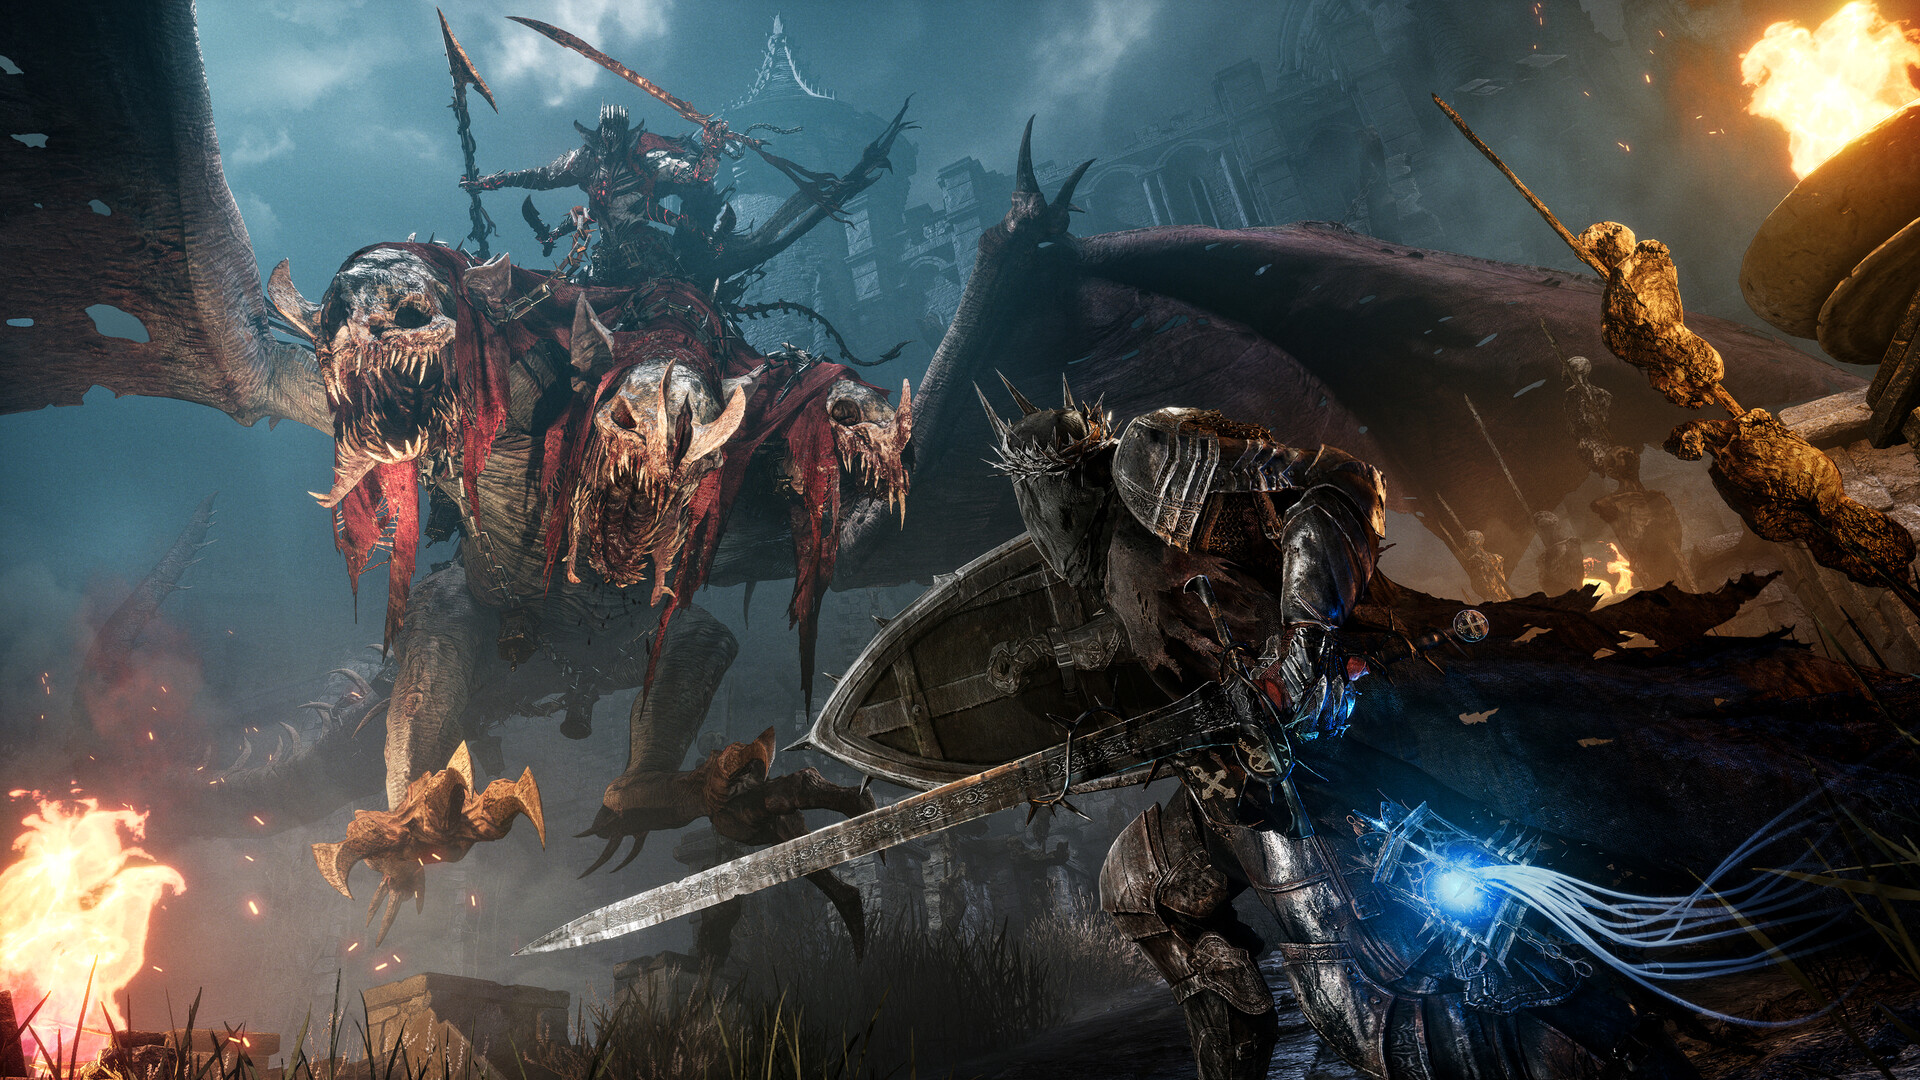 Lords Of The Fallen™ 2014 on Steam